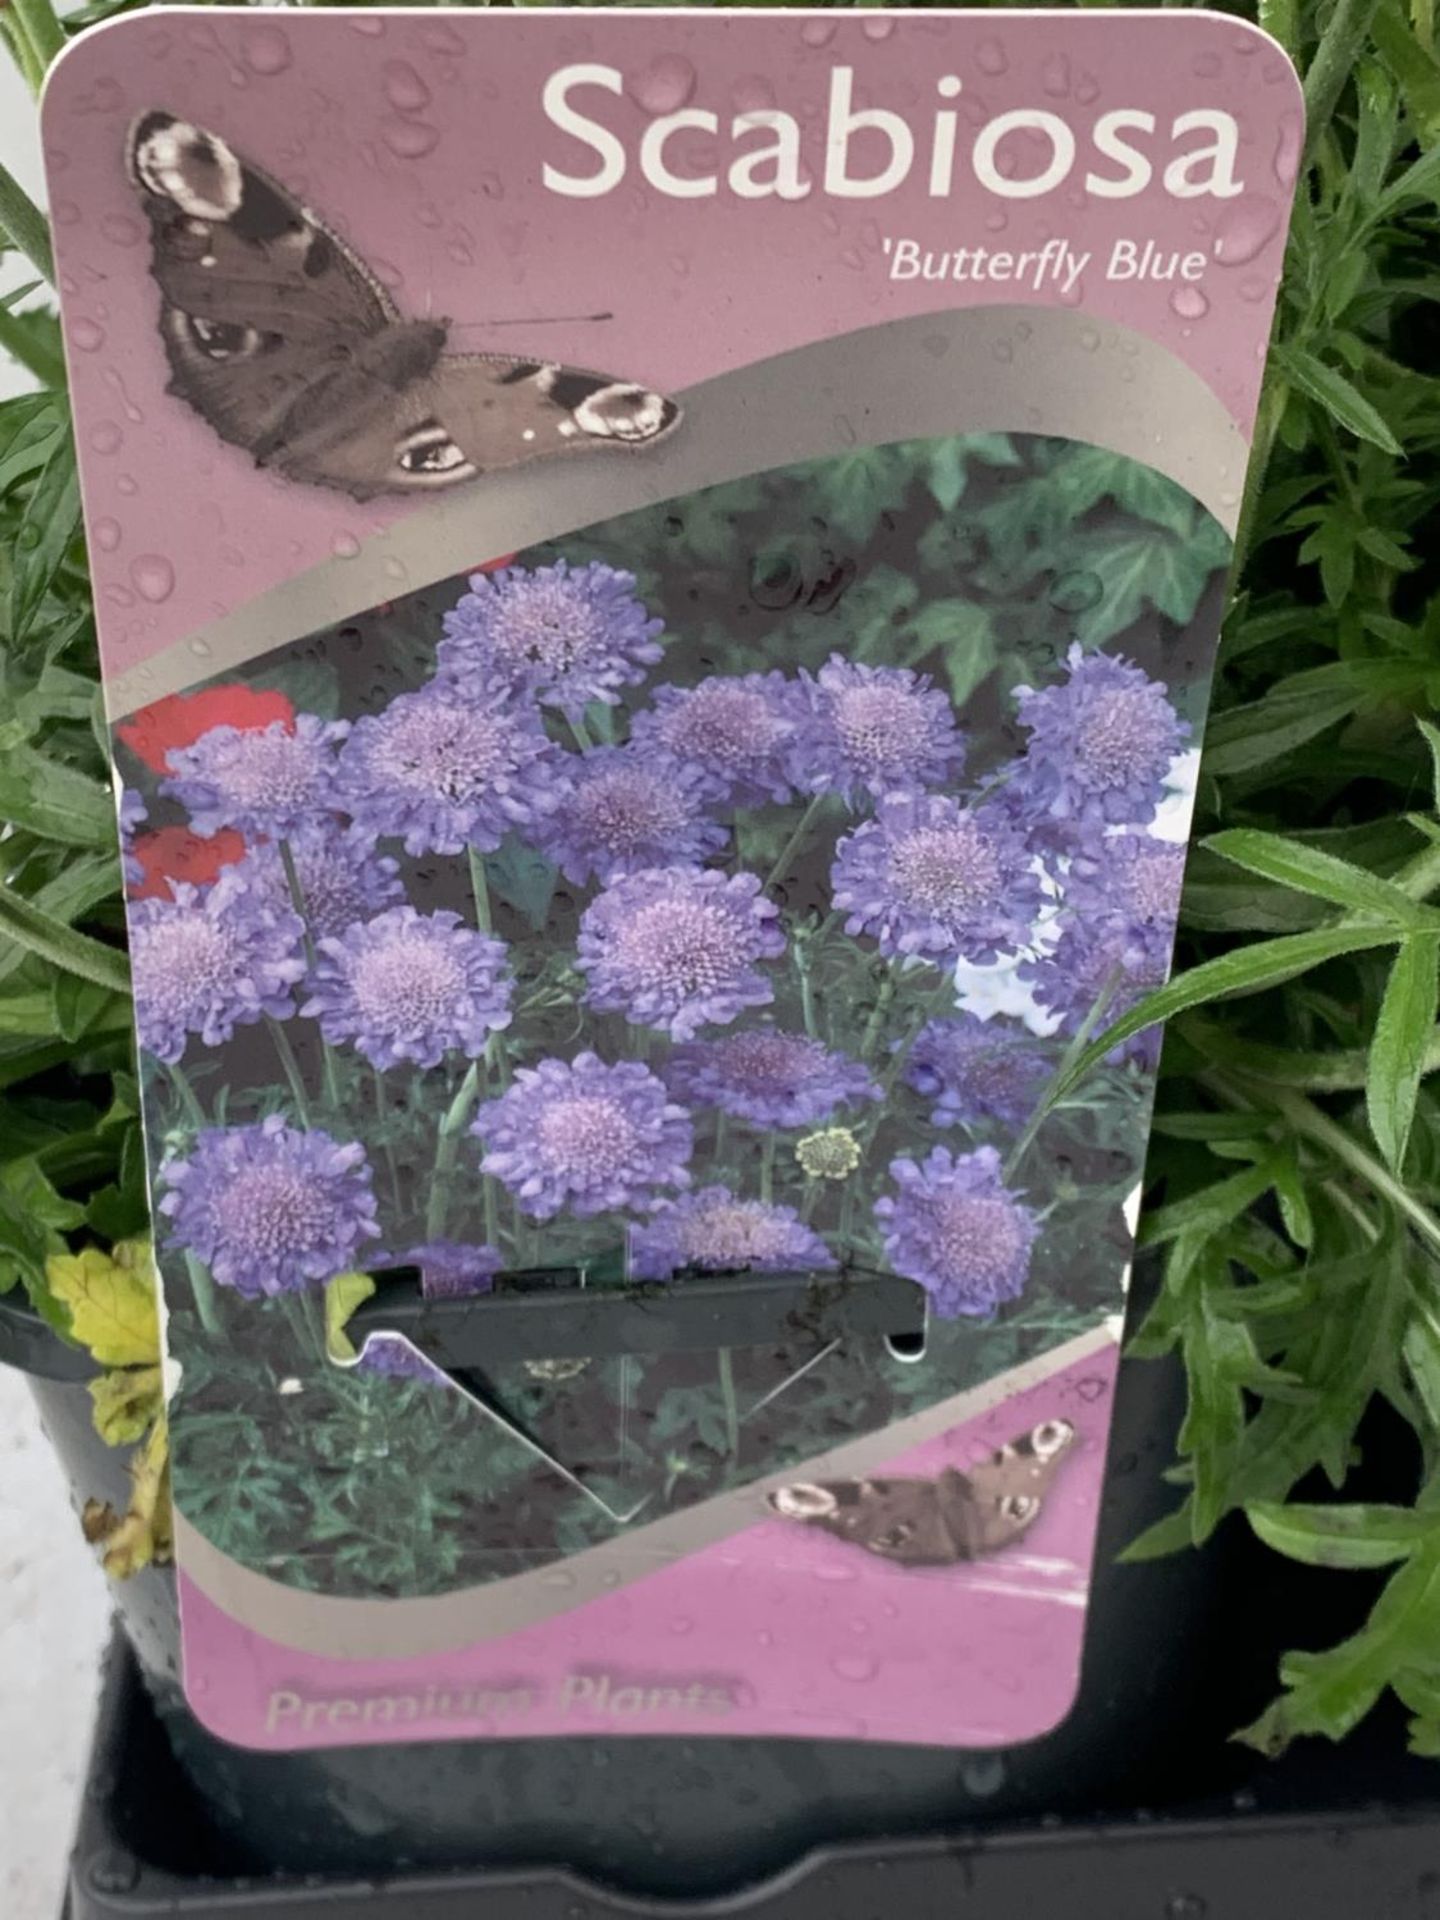 SIX SCABIOSA BUTTERFLY BLUE IN 2 LTR POTS 50-60CM TALL TO BE SOLD FOR THE SIX PLUS VAT - Image 5 of 5